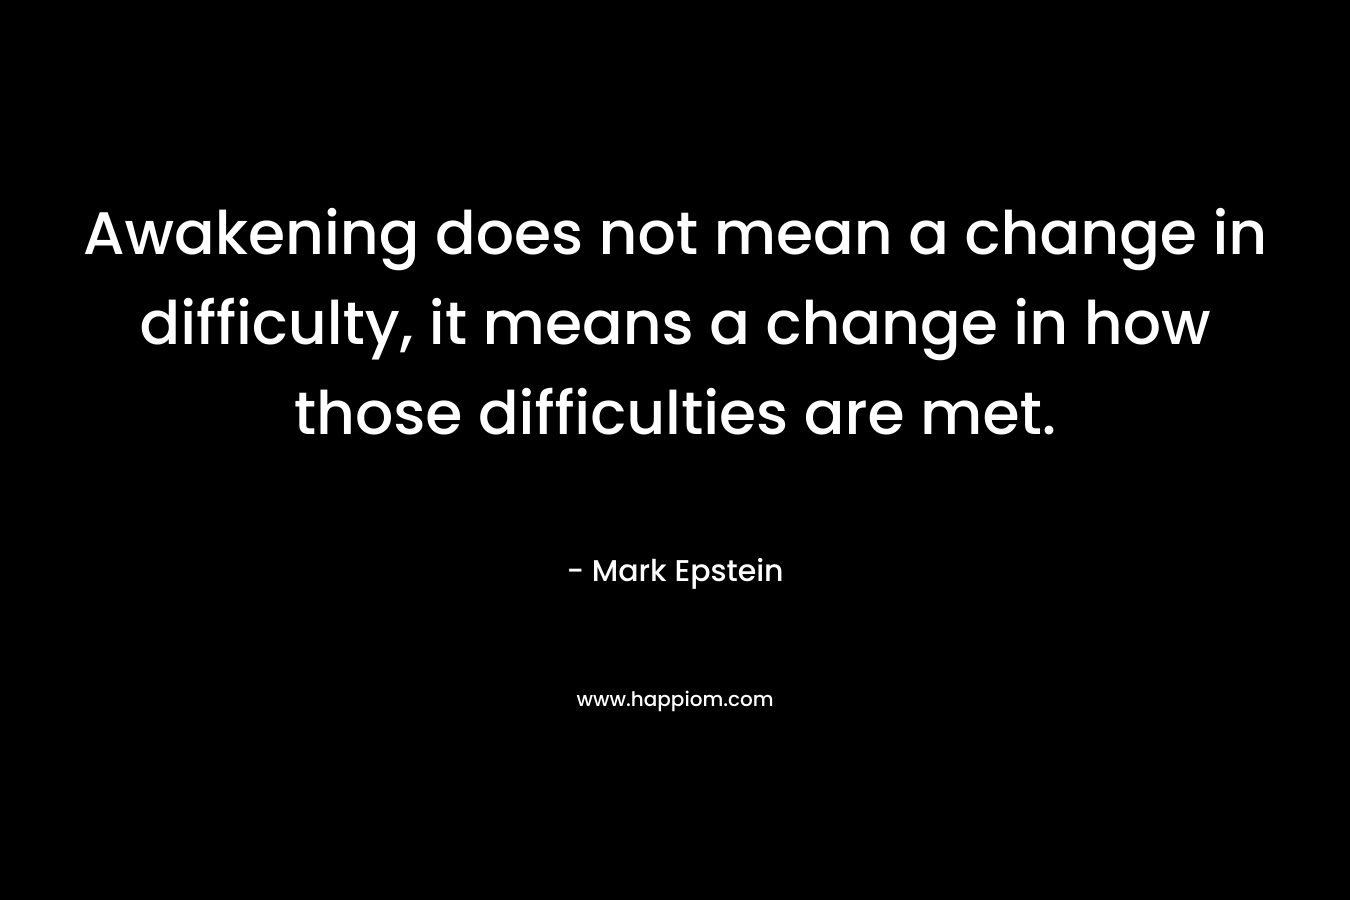 Awakening does not mean a change in difficulty, it means a change in how those difficulties are met. – Mark Epstein